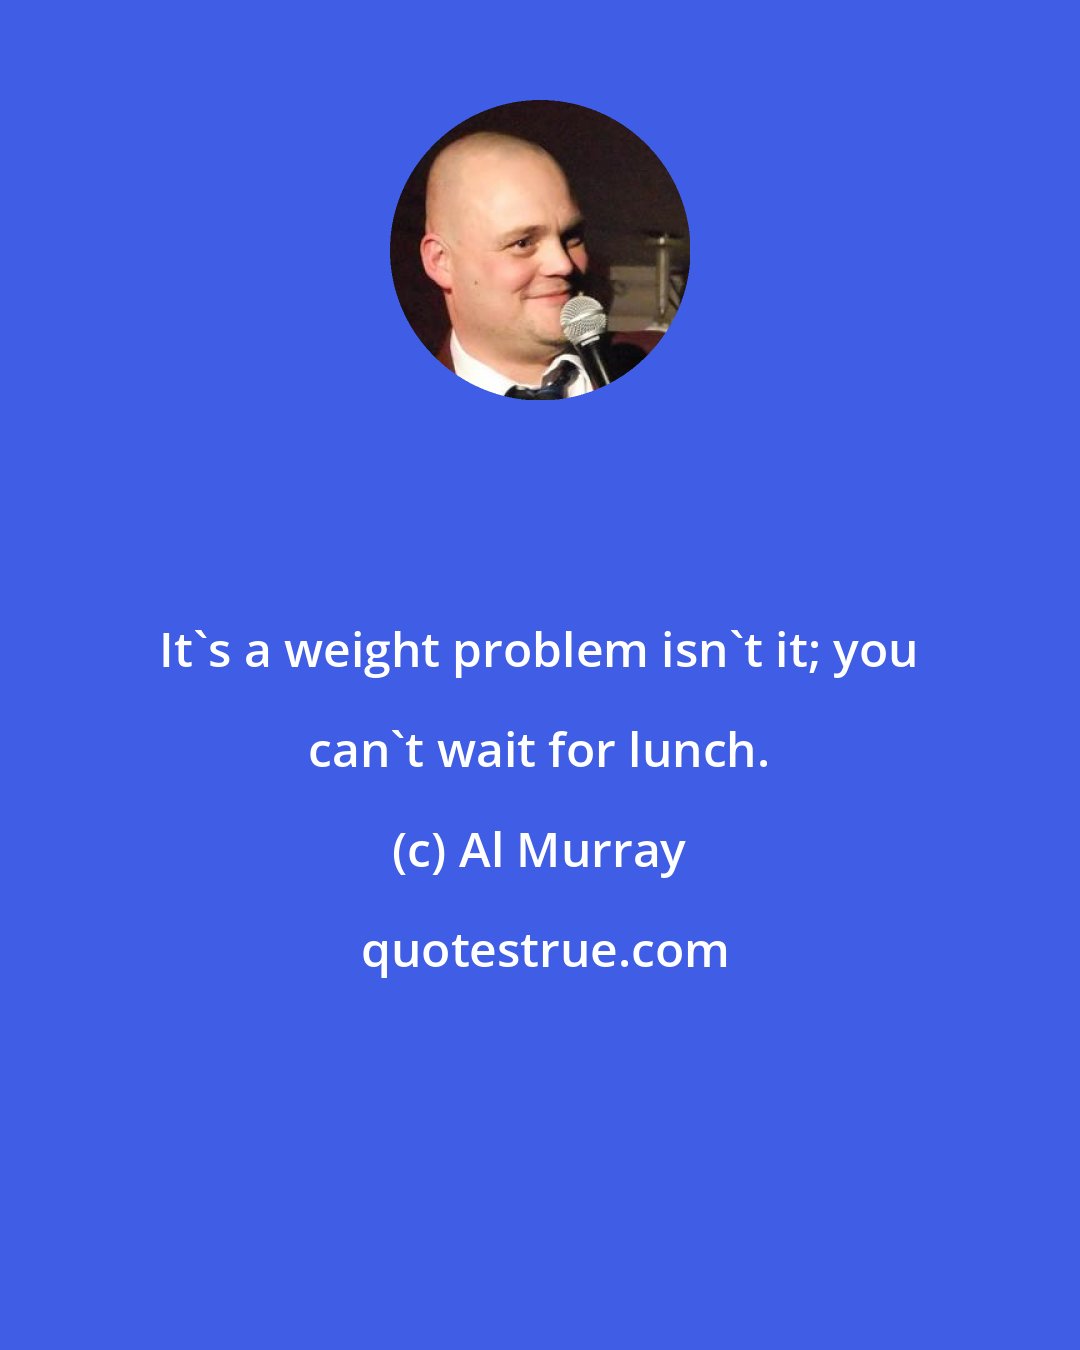 Al Murray: It's a weight problem isn't it; you can't wait for lunch.